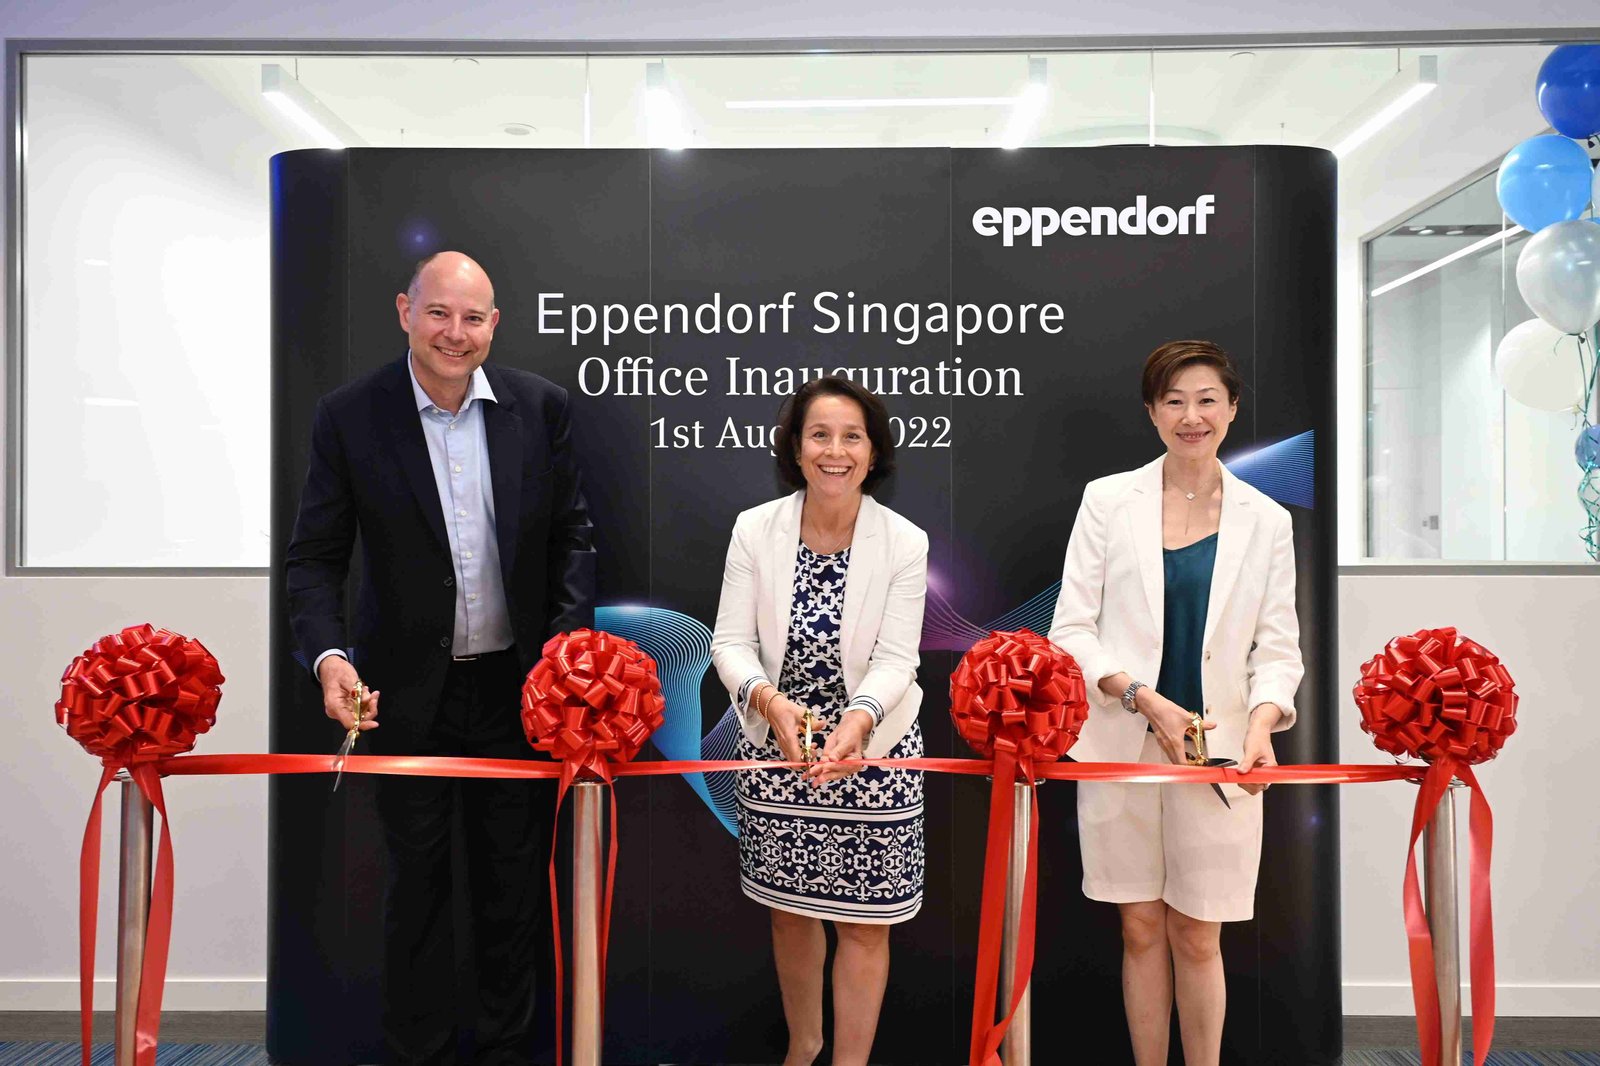 The official opening of the new Eppendorf site in Singapore was assumed by Dr. Thomas Keller, Senior Vice President Market Region Asia/Pacific/Africa at Eppendorf, Eva van Pelt, Co-Chairman of the Management Board of Eppendorf SE, and Lina Tao, Vice President Bioprocess Sales & Service at Eppendorf.